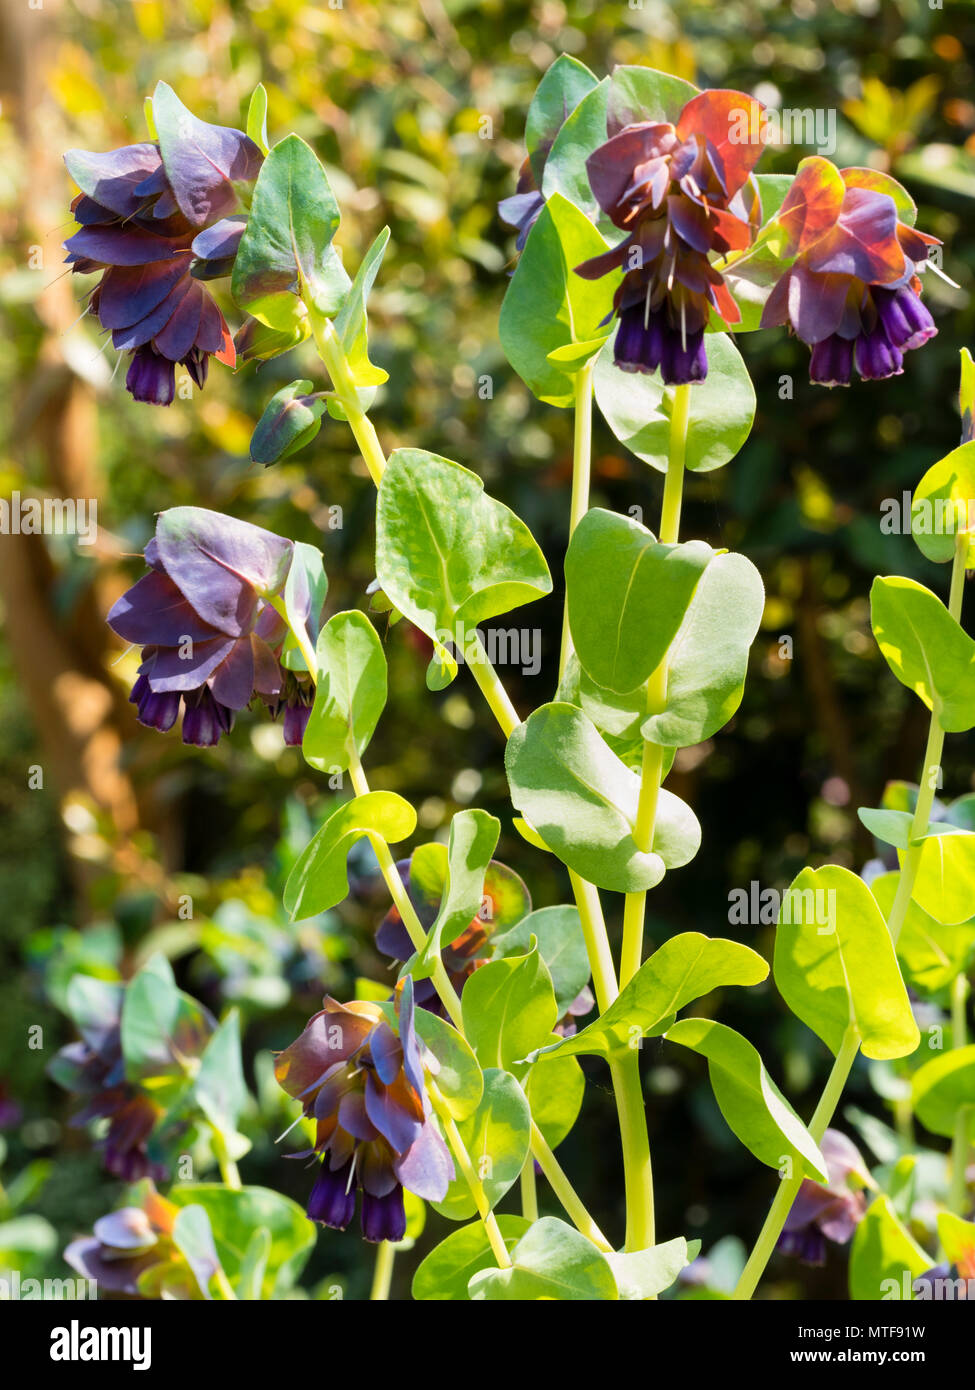 Blue -green foliage, darker bracts and purple flowers of the summer blooming annual Honeywort, Cerinthe major 'Purpurascens' Stock Photo